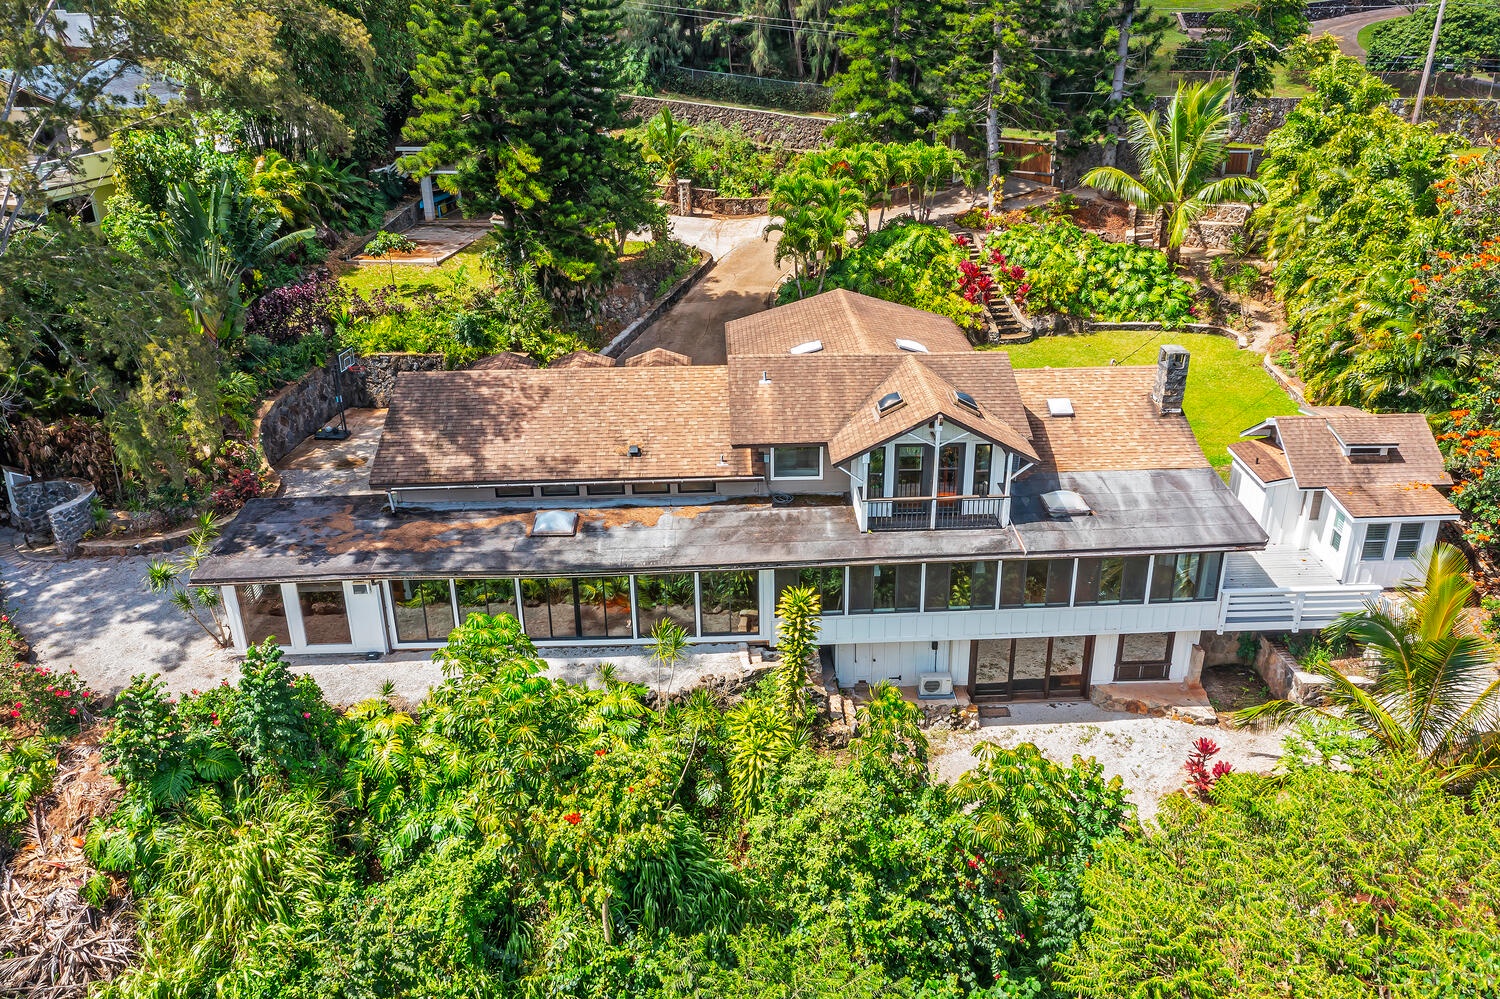 Haleiwa Vacation Rentals, Mele Makana - This home is truly a forest-lovers dream